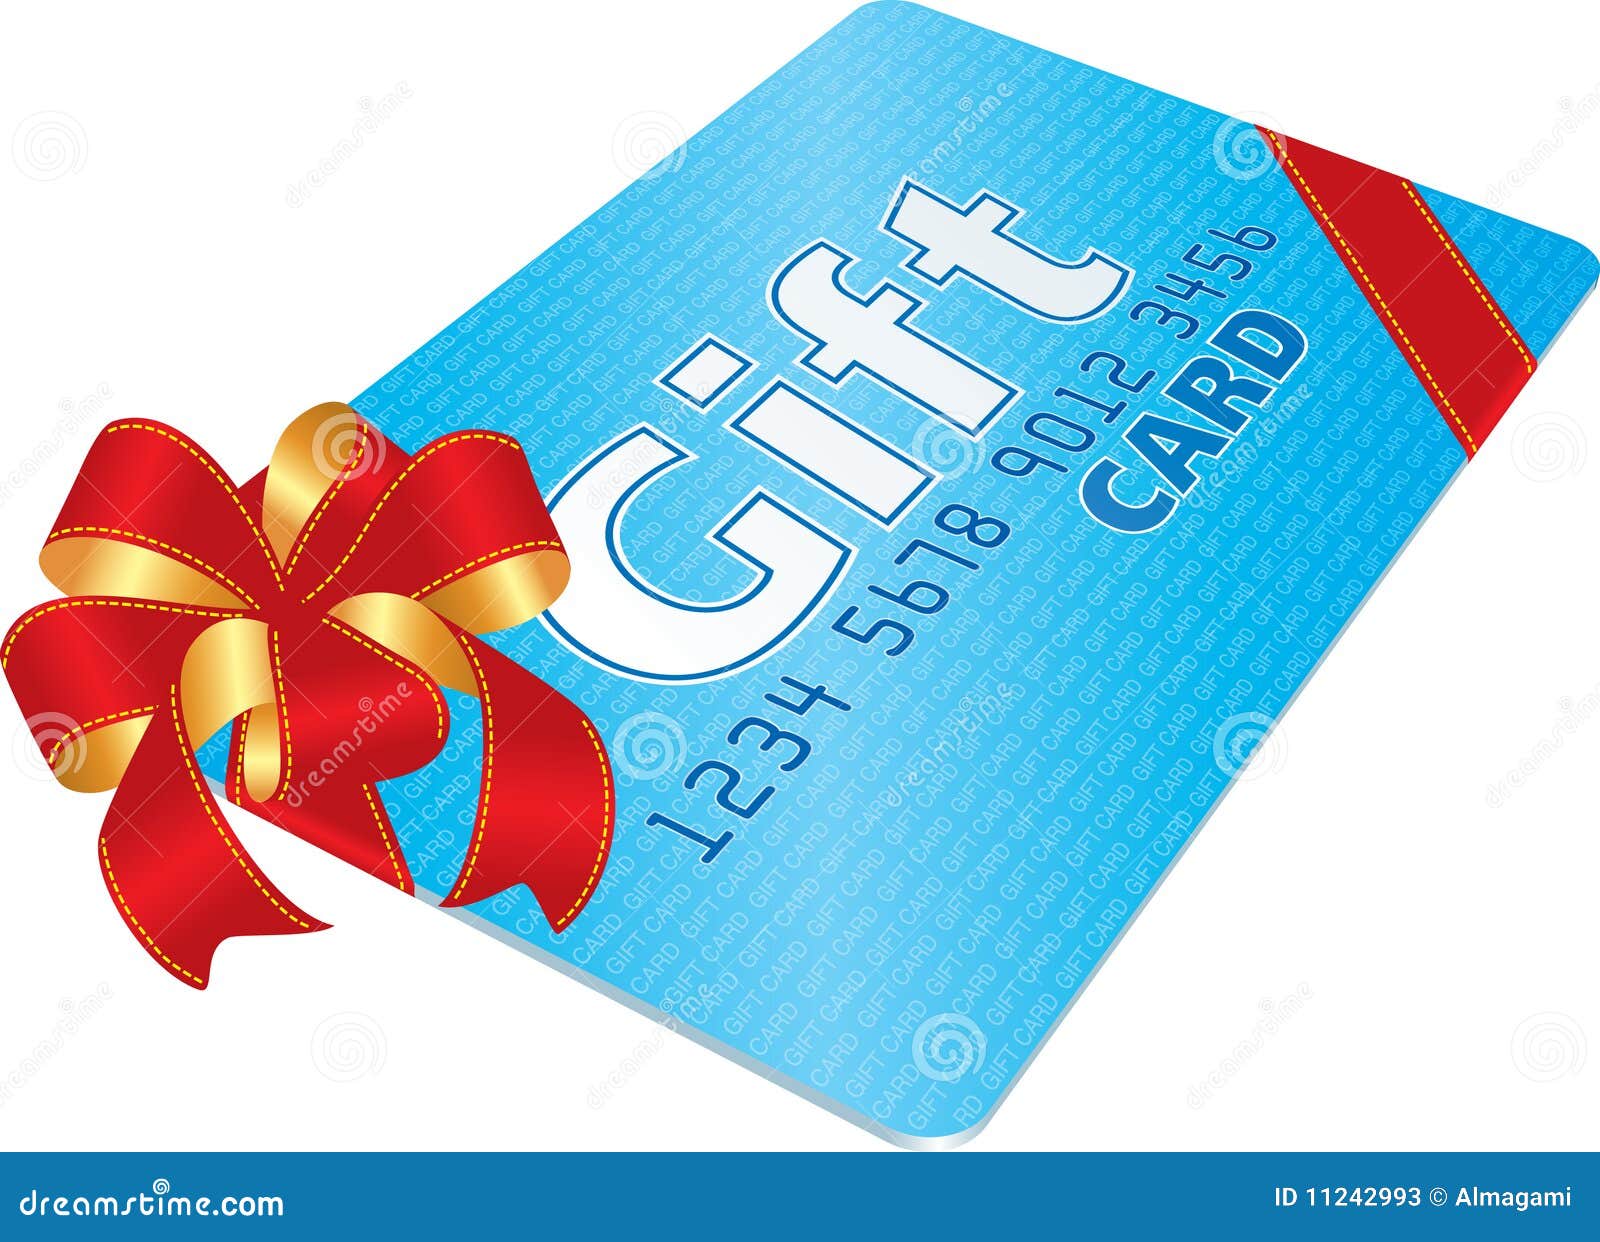 free gift card clipart - photo #42